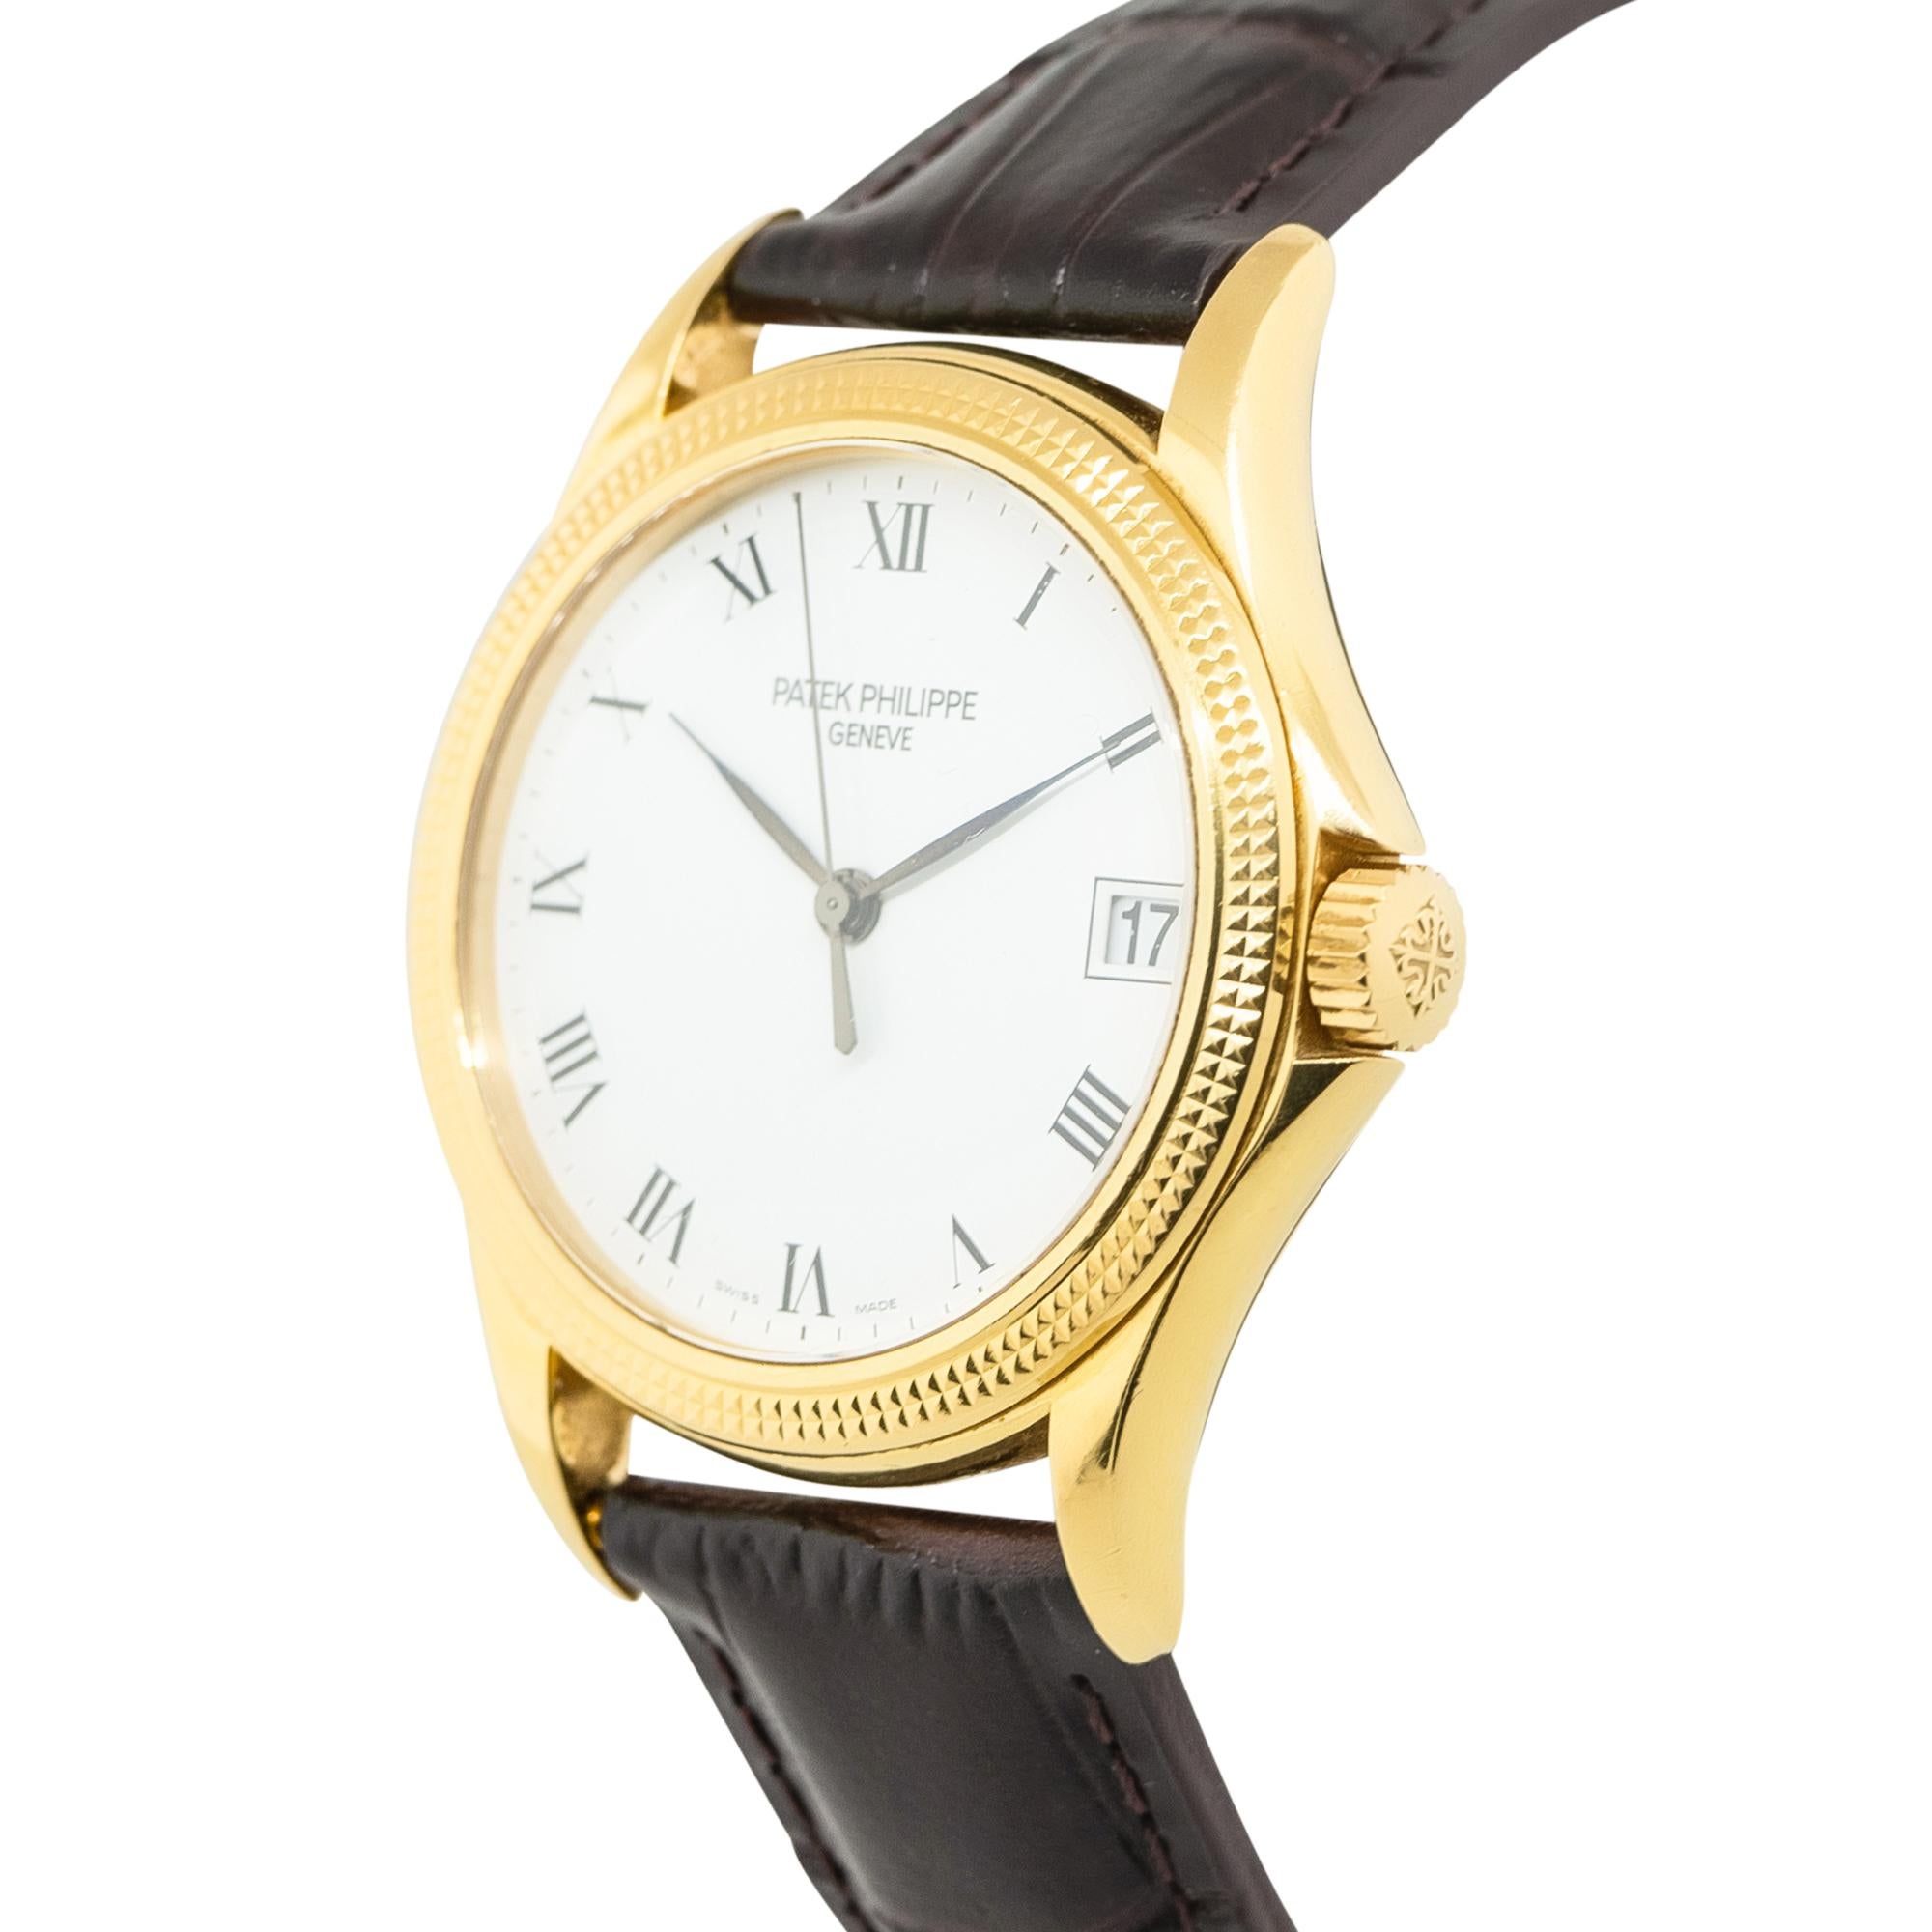 Brand: Patek Philippe
Style: Calatrava
Case Material: 18k Yellow Gold
Bezel: 18k Yellow Gold
Dial: White Dial with Black Roman Numerals. Date can be found at 3 o'clock
Bracelet: Brown Leather Bracelet with Patek Buckle
Case Diameter: 37mm
Crystal: